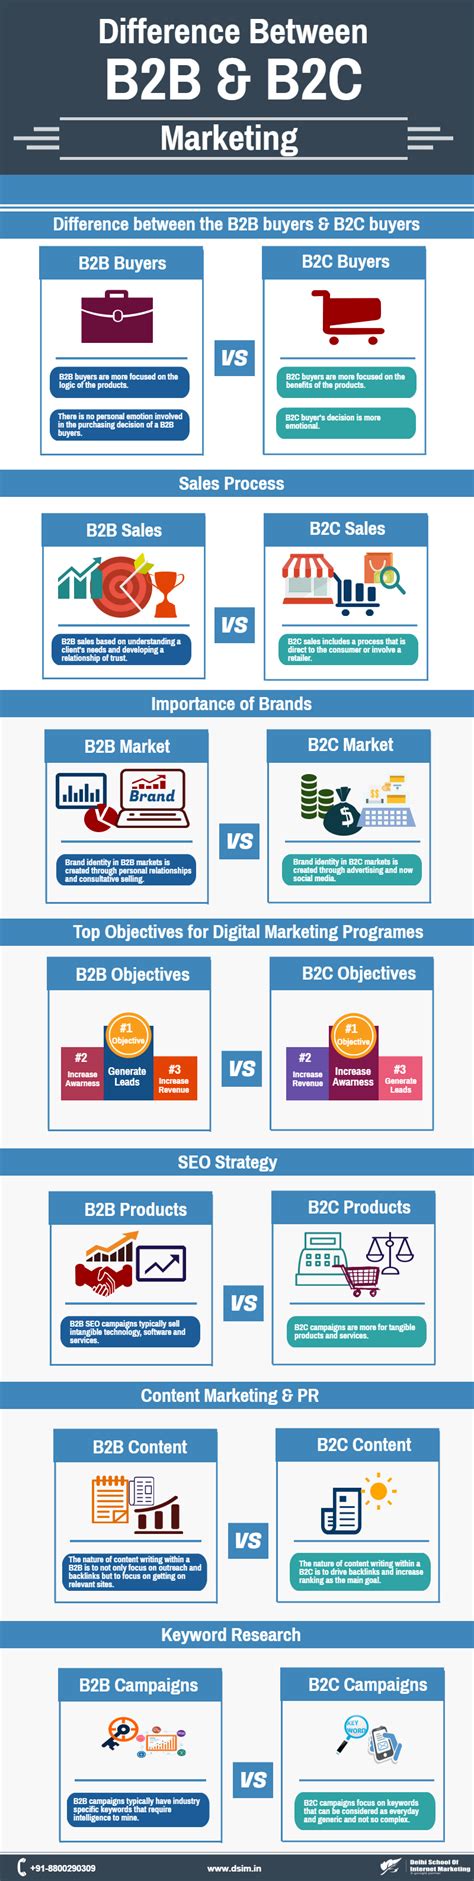 infographic difference bb bc marketing